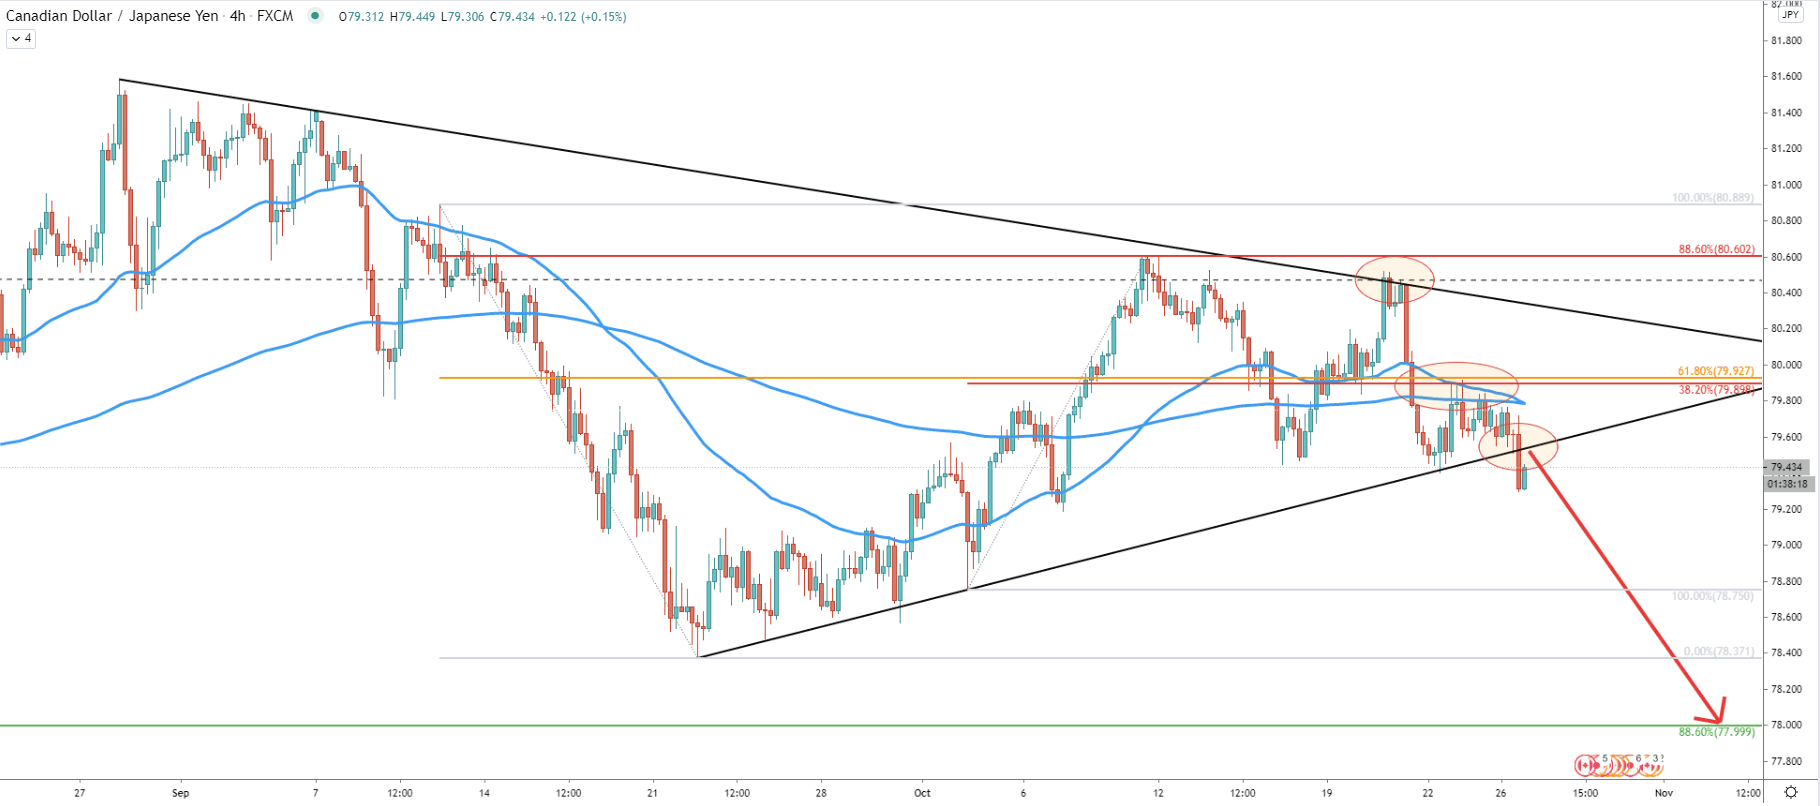 CAD/JPY 4-Hour Technical Analysis 26 Oct 2020